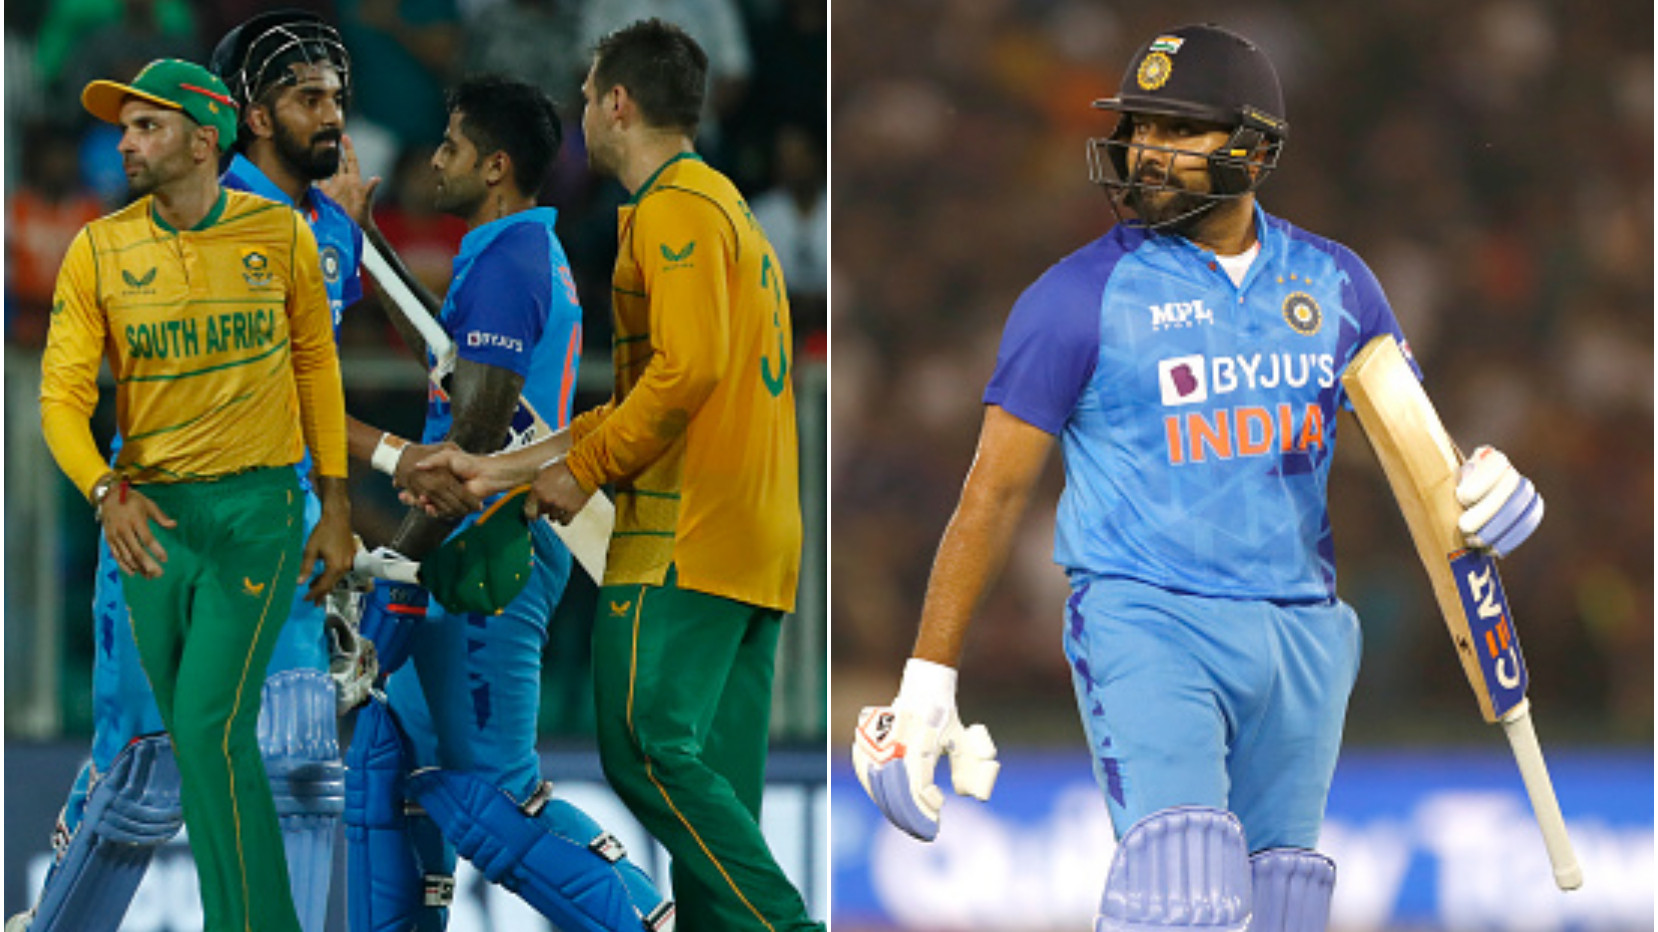 IND v SA 2022: “It was nice to play a game like that,” - Rohit Sharma says after win over SA in series-opener